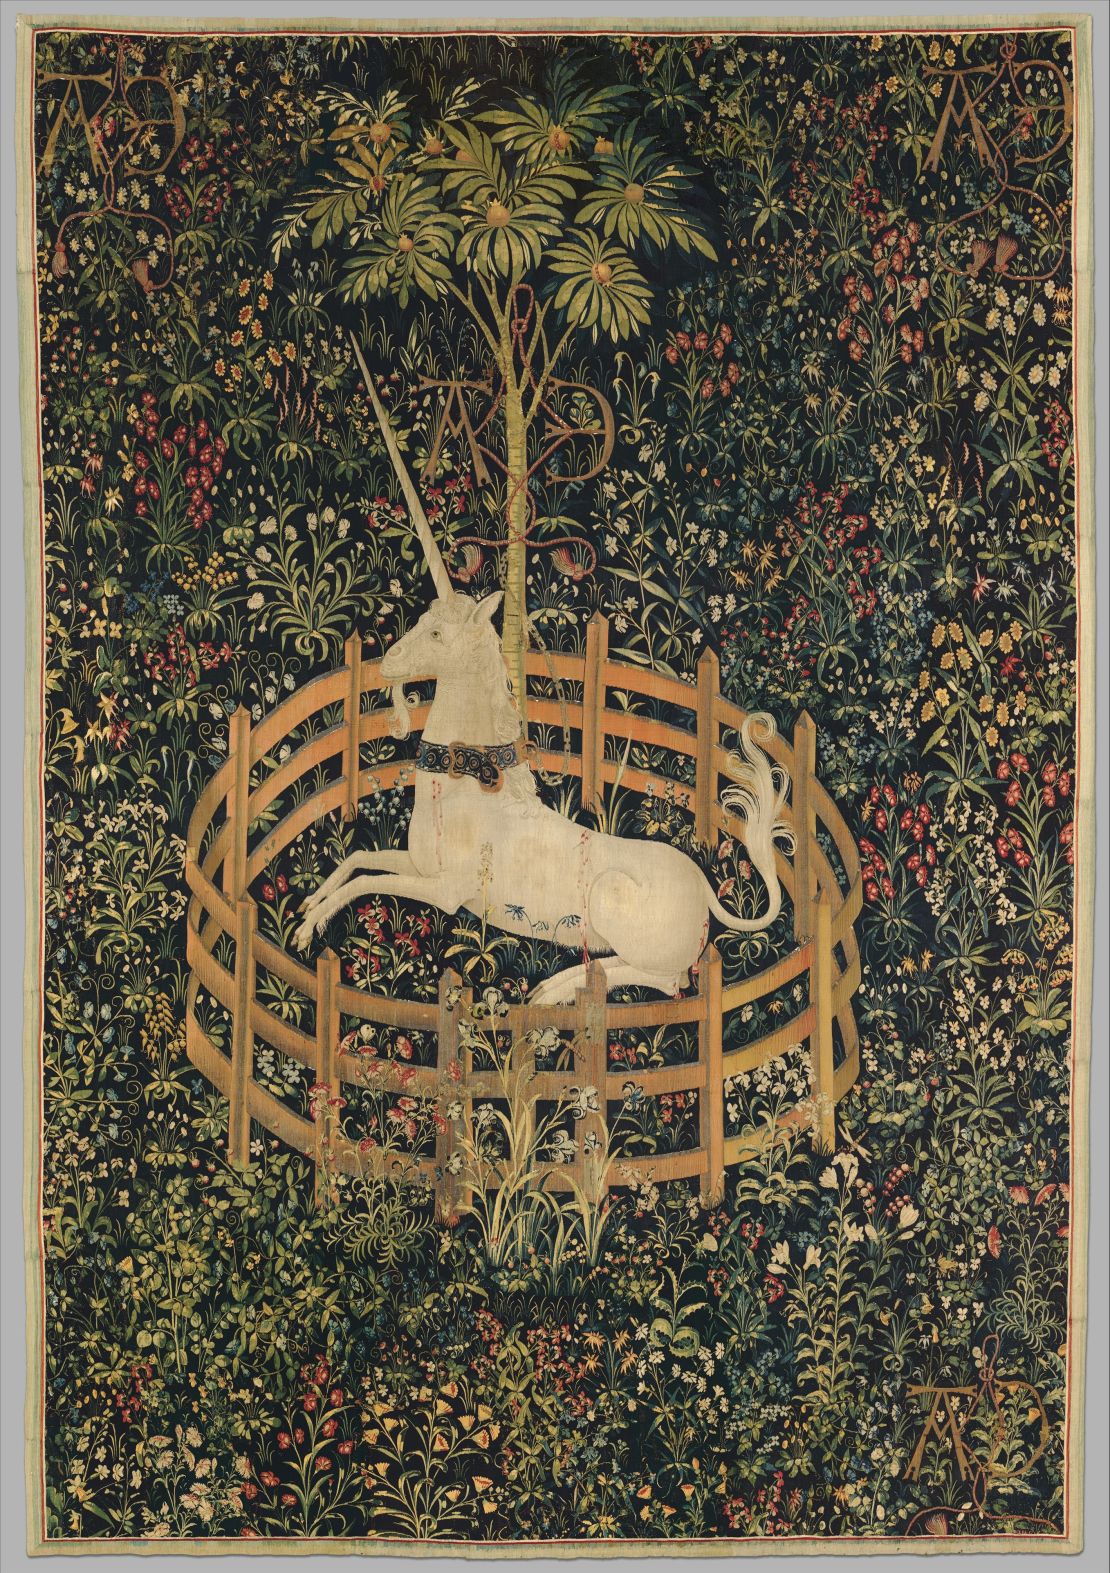 The "Unicorn Tapestries" were integral to the development of "Sleeping Beauty."